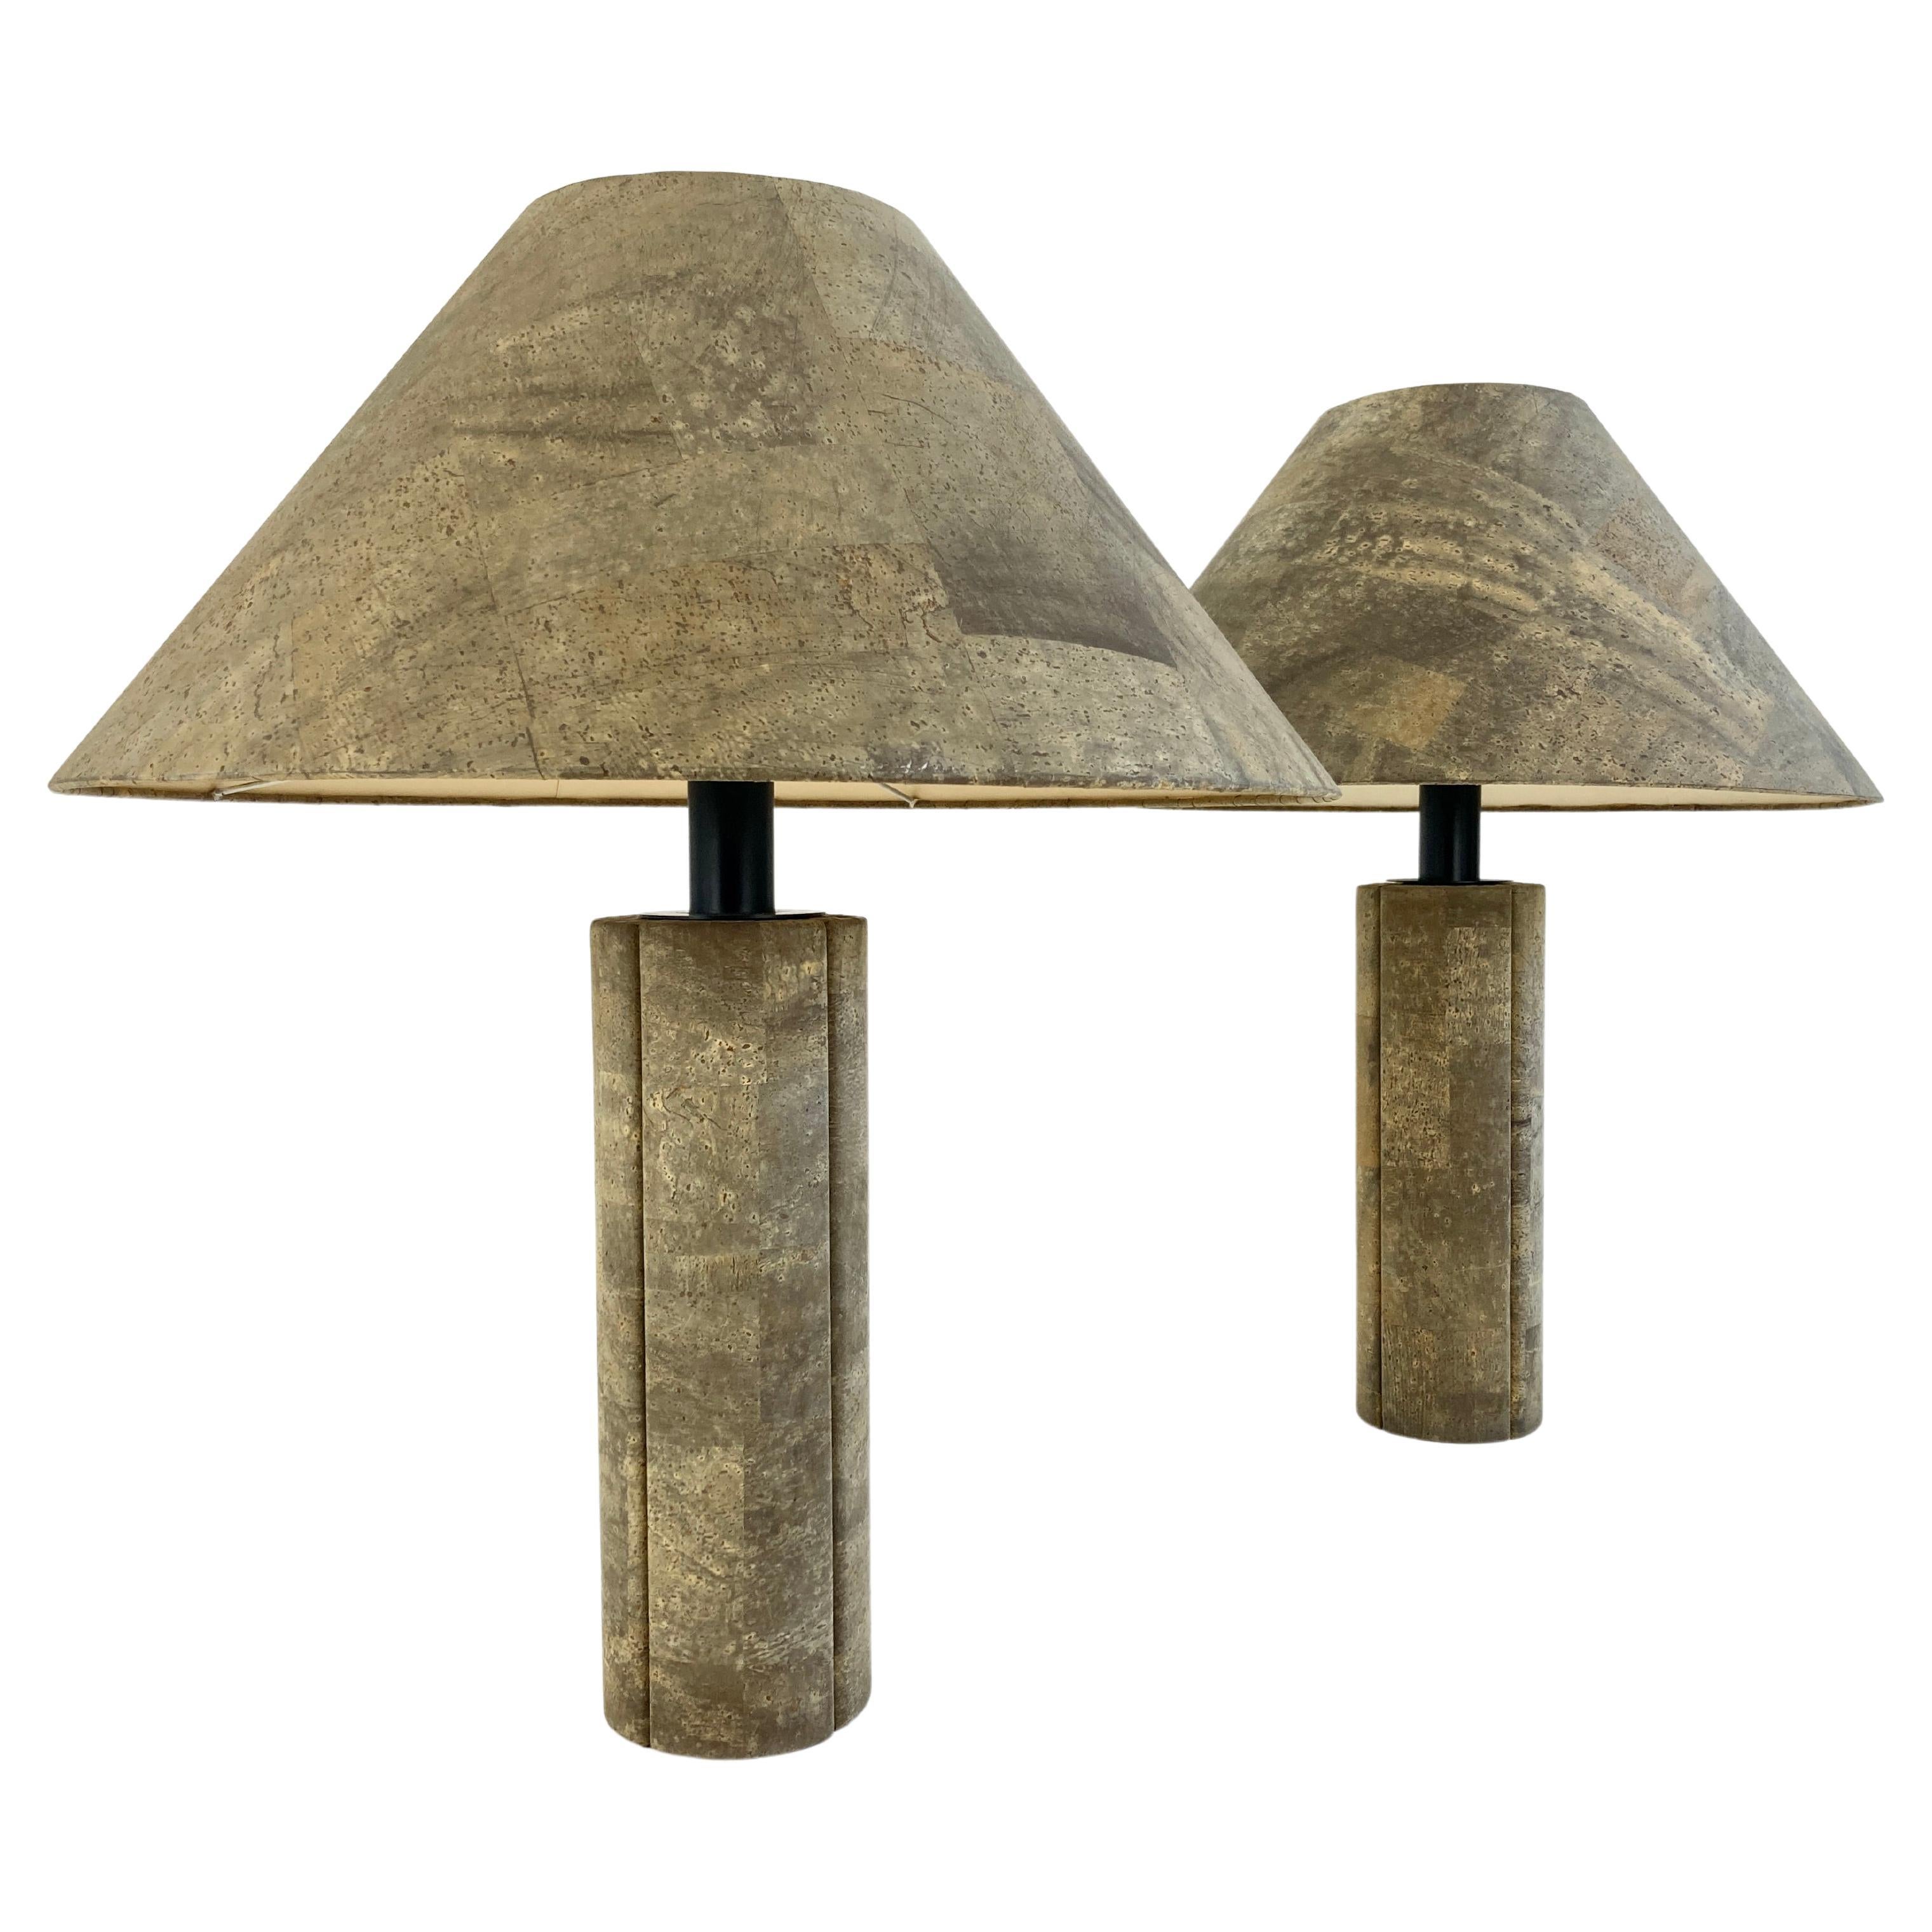 Pair of Cork Lamps by Ingo Maurer, Design M, Germany, 1974